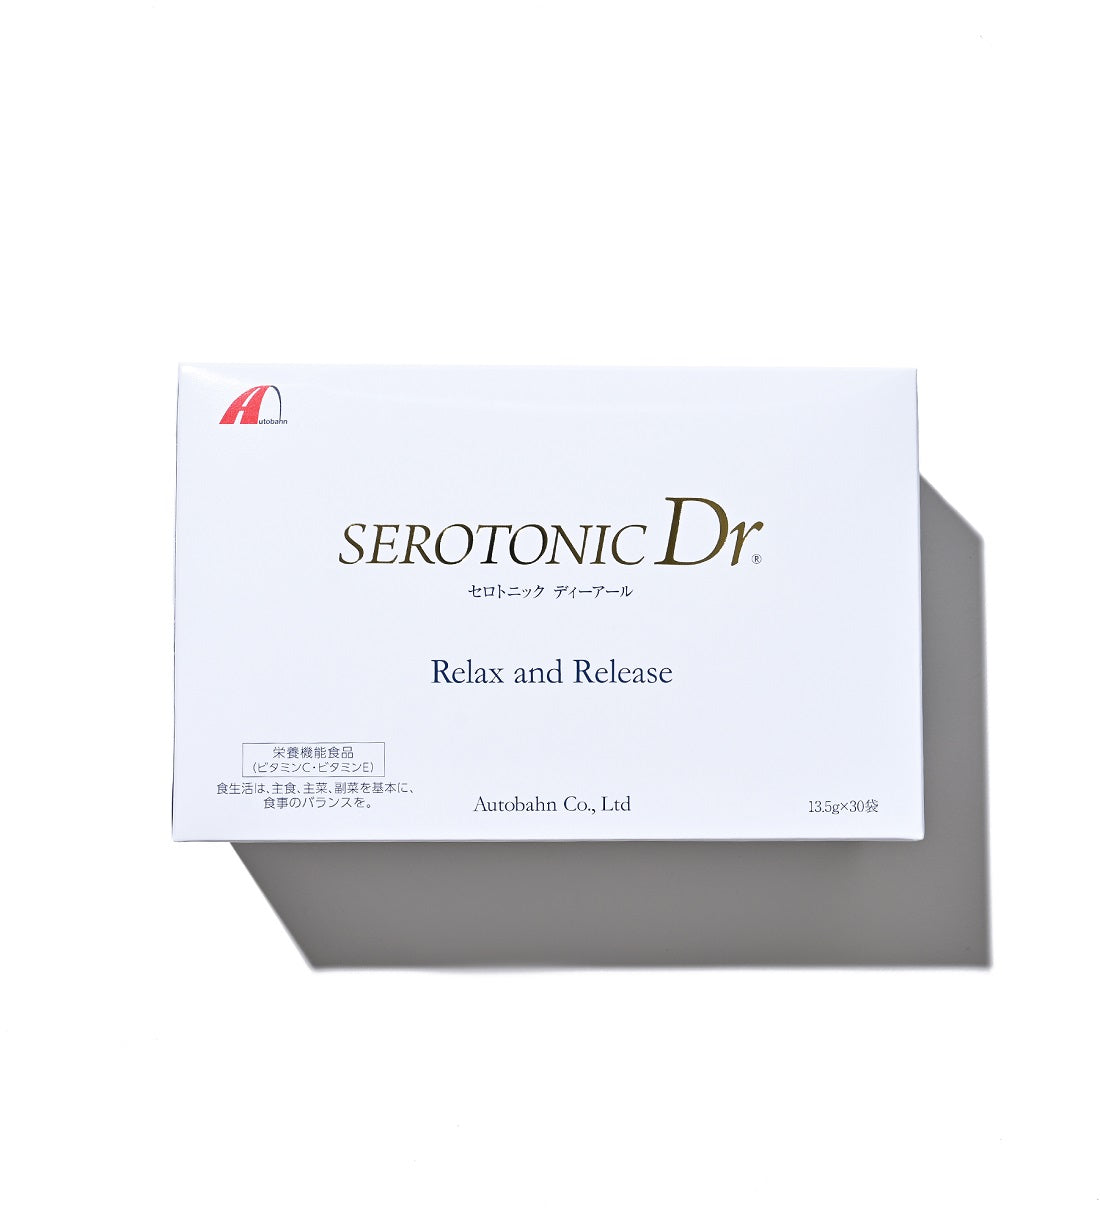 SEROTONIC Dr | Serotonin Boosting Supplement for Stress and Anxiety